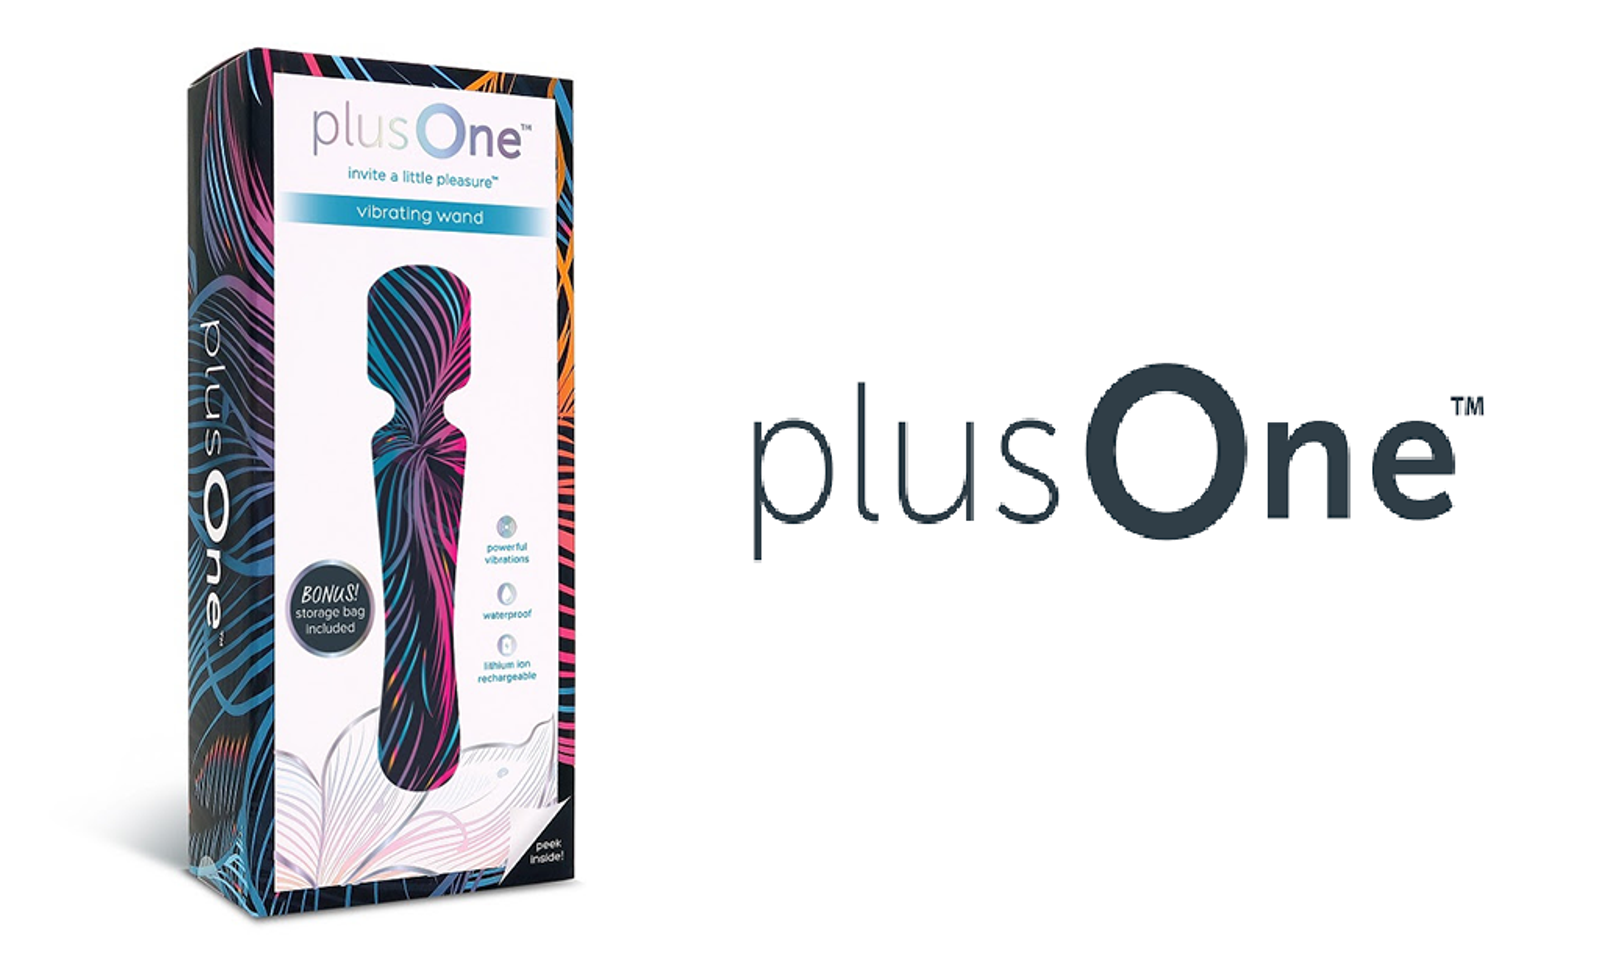 plusOne Introduces New, Powerful Vibrating Wand to Consumers